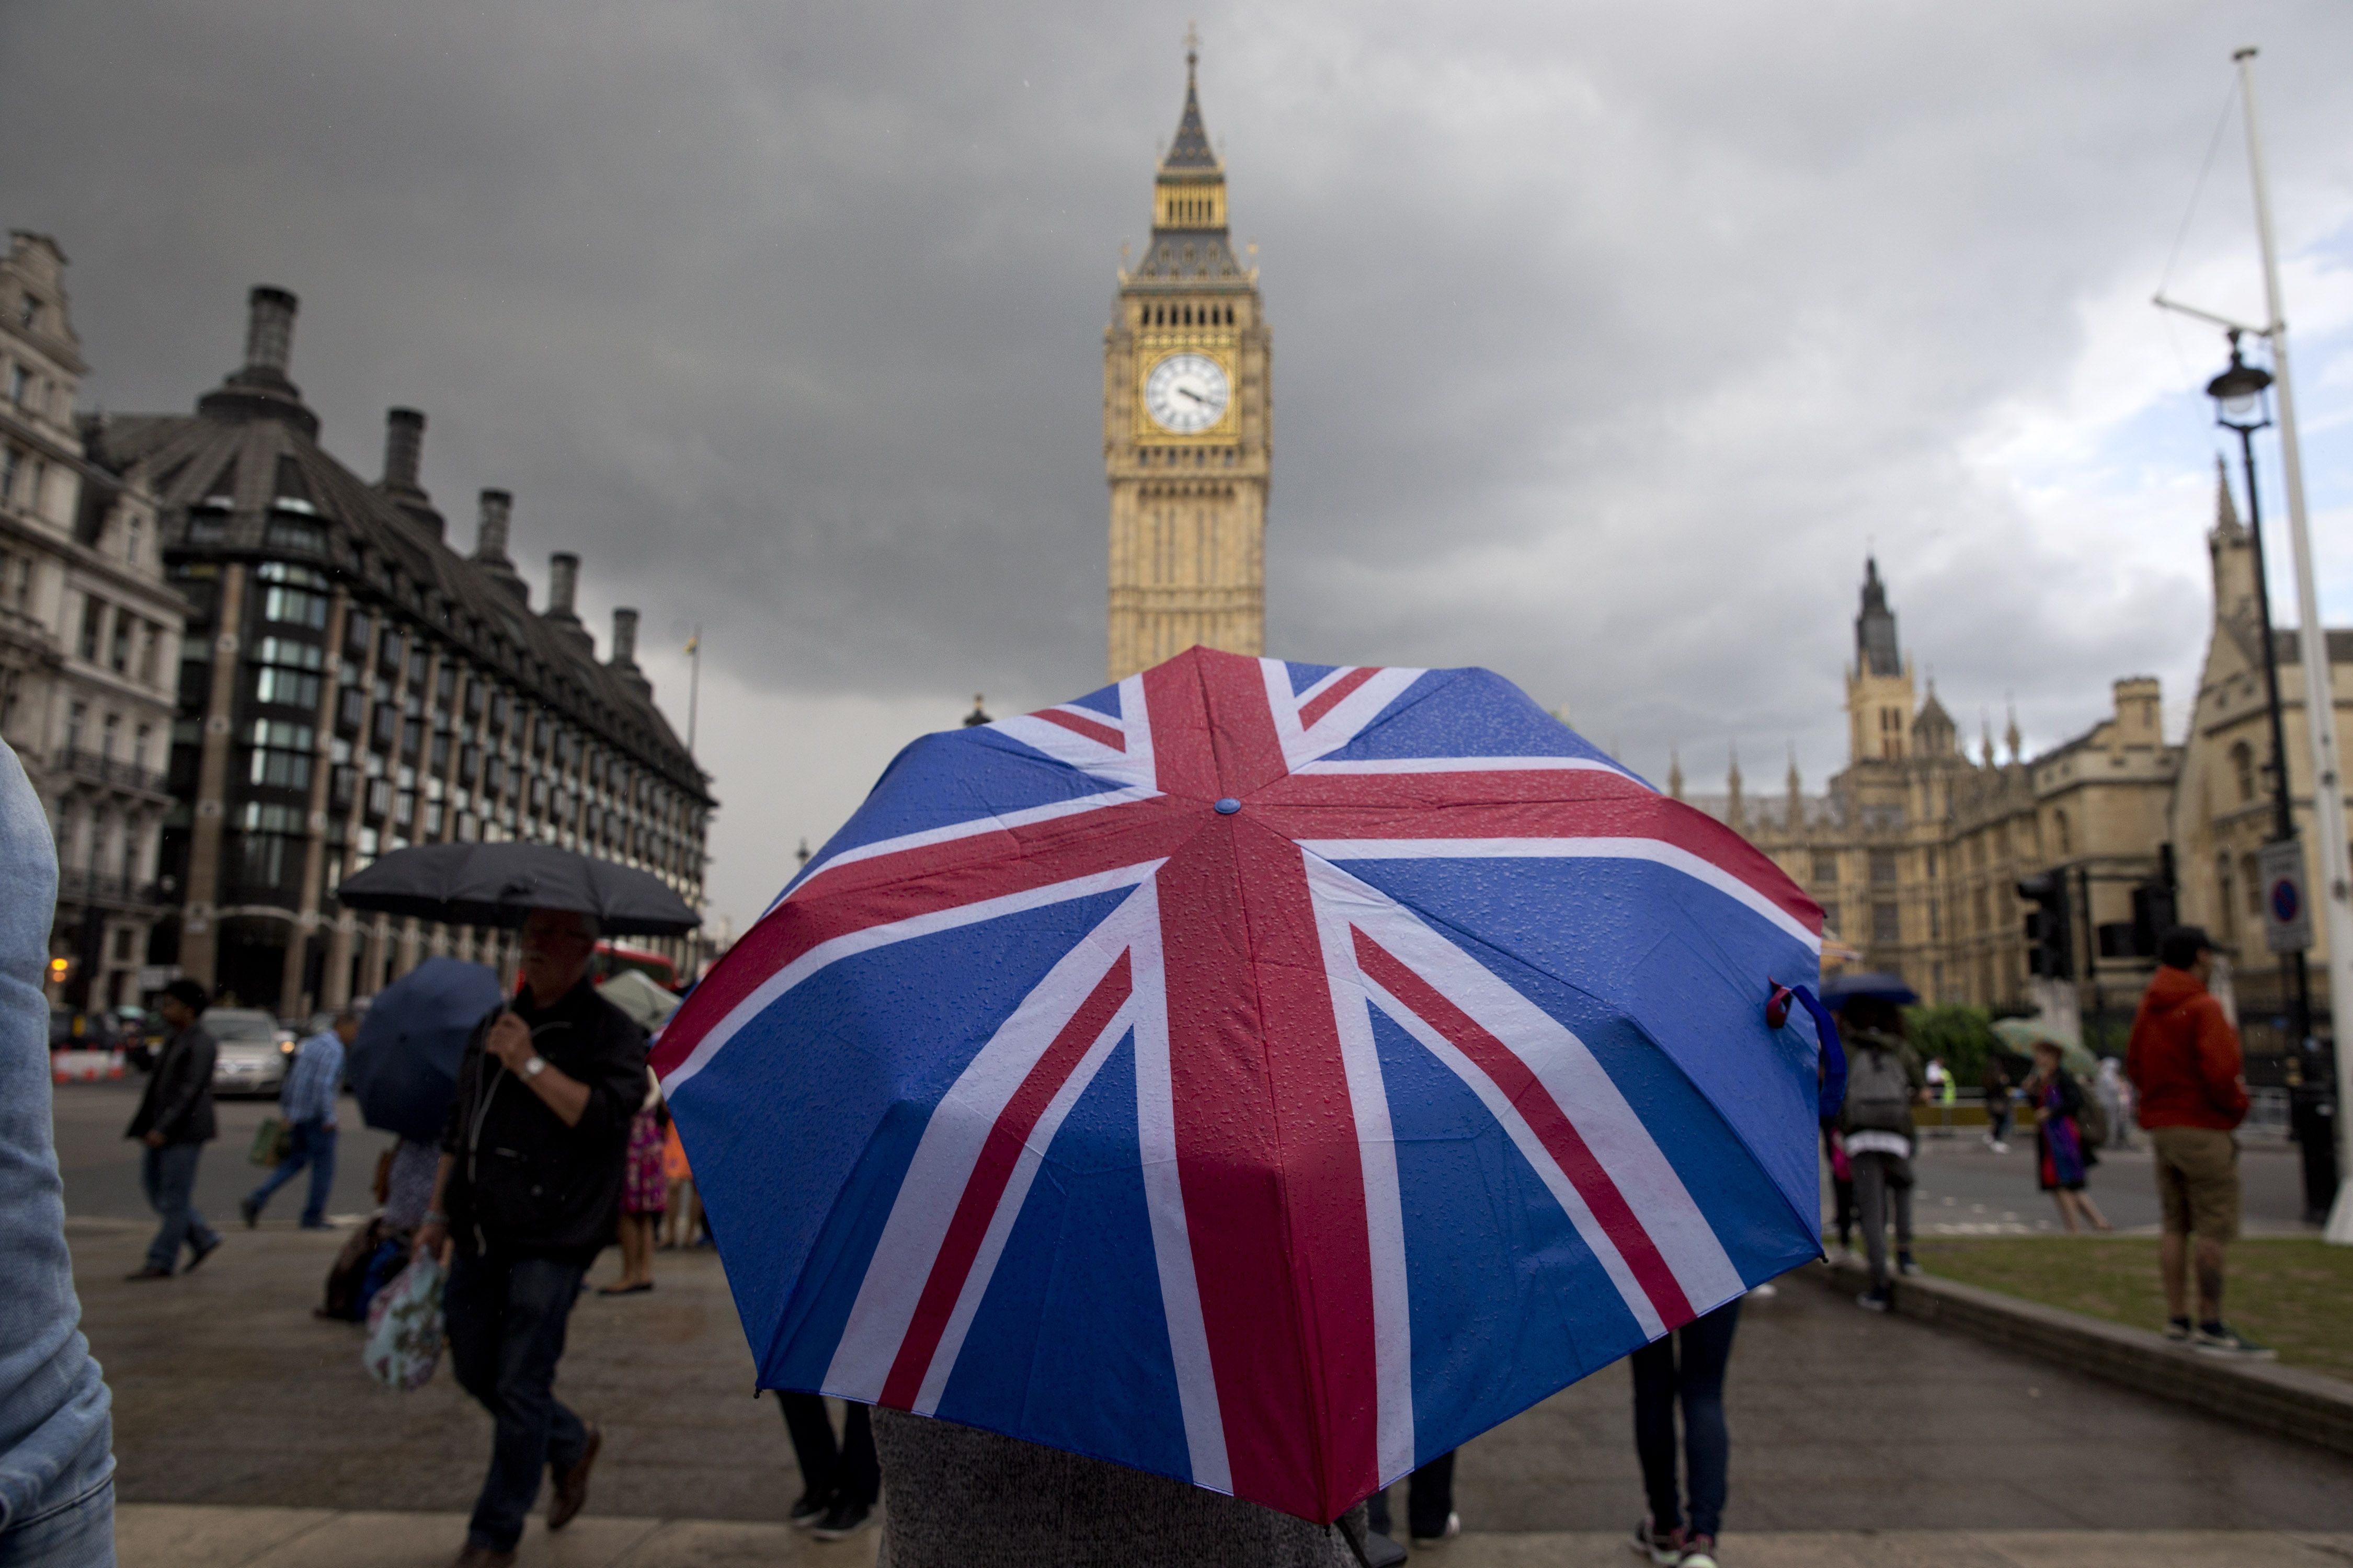 A pedestrian shelters from the rain beneath a Union flag themed umbrella as they walk near the Big Ben clock face and the Elizabeth Tower at the Houses of Parliament in central London on June 25, 2016 (Justin Tallis—AFP/Getty Images)